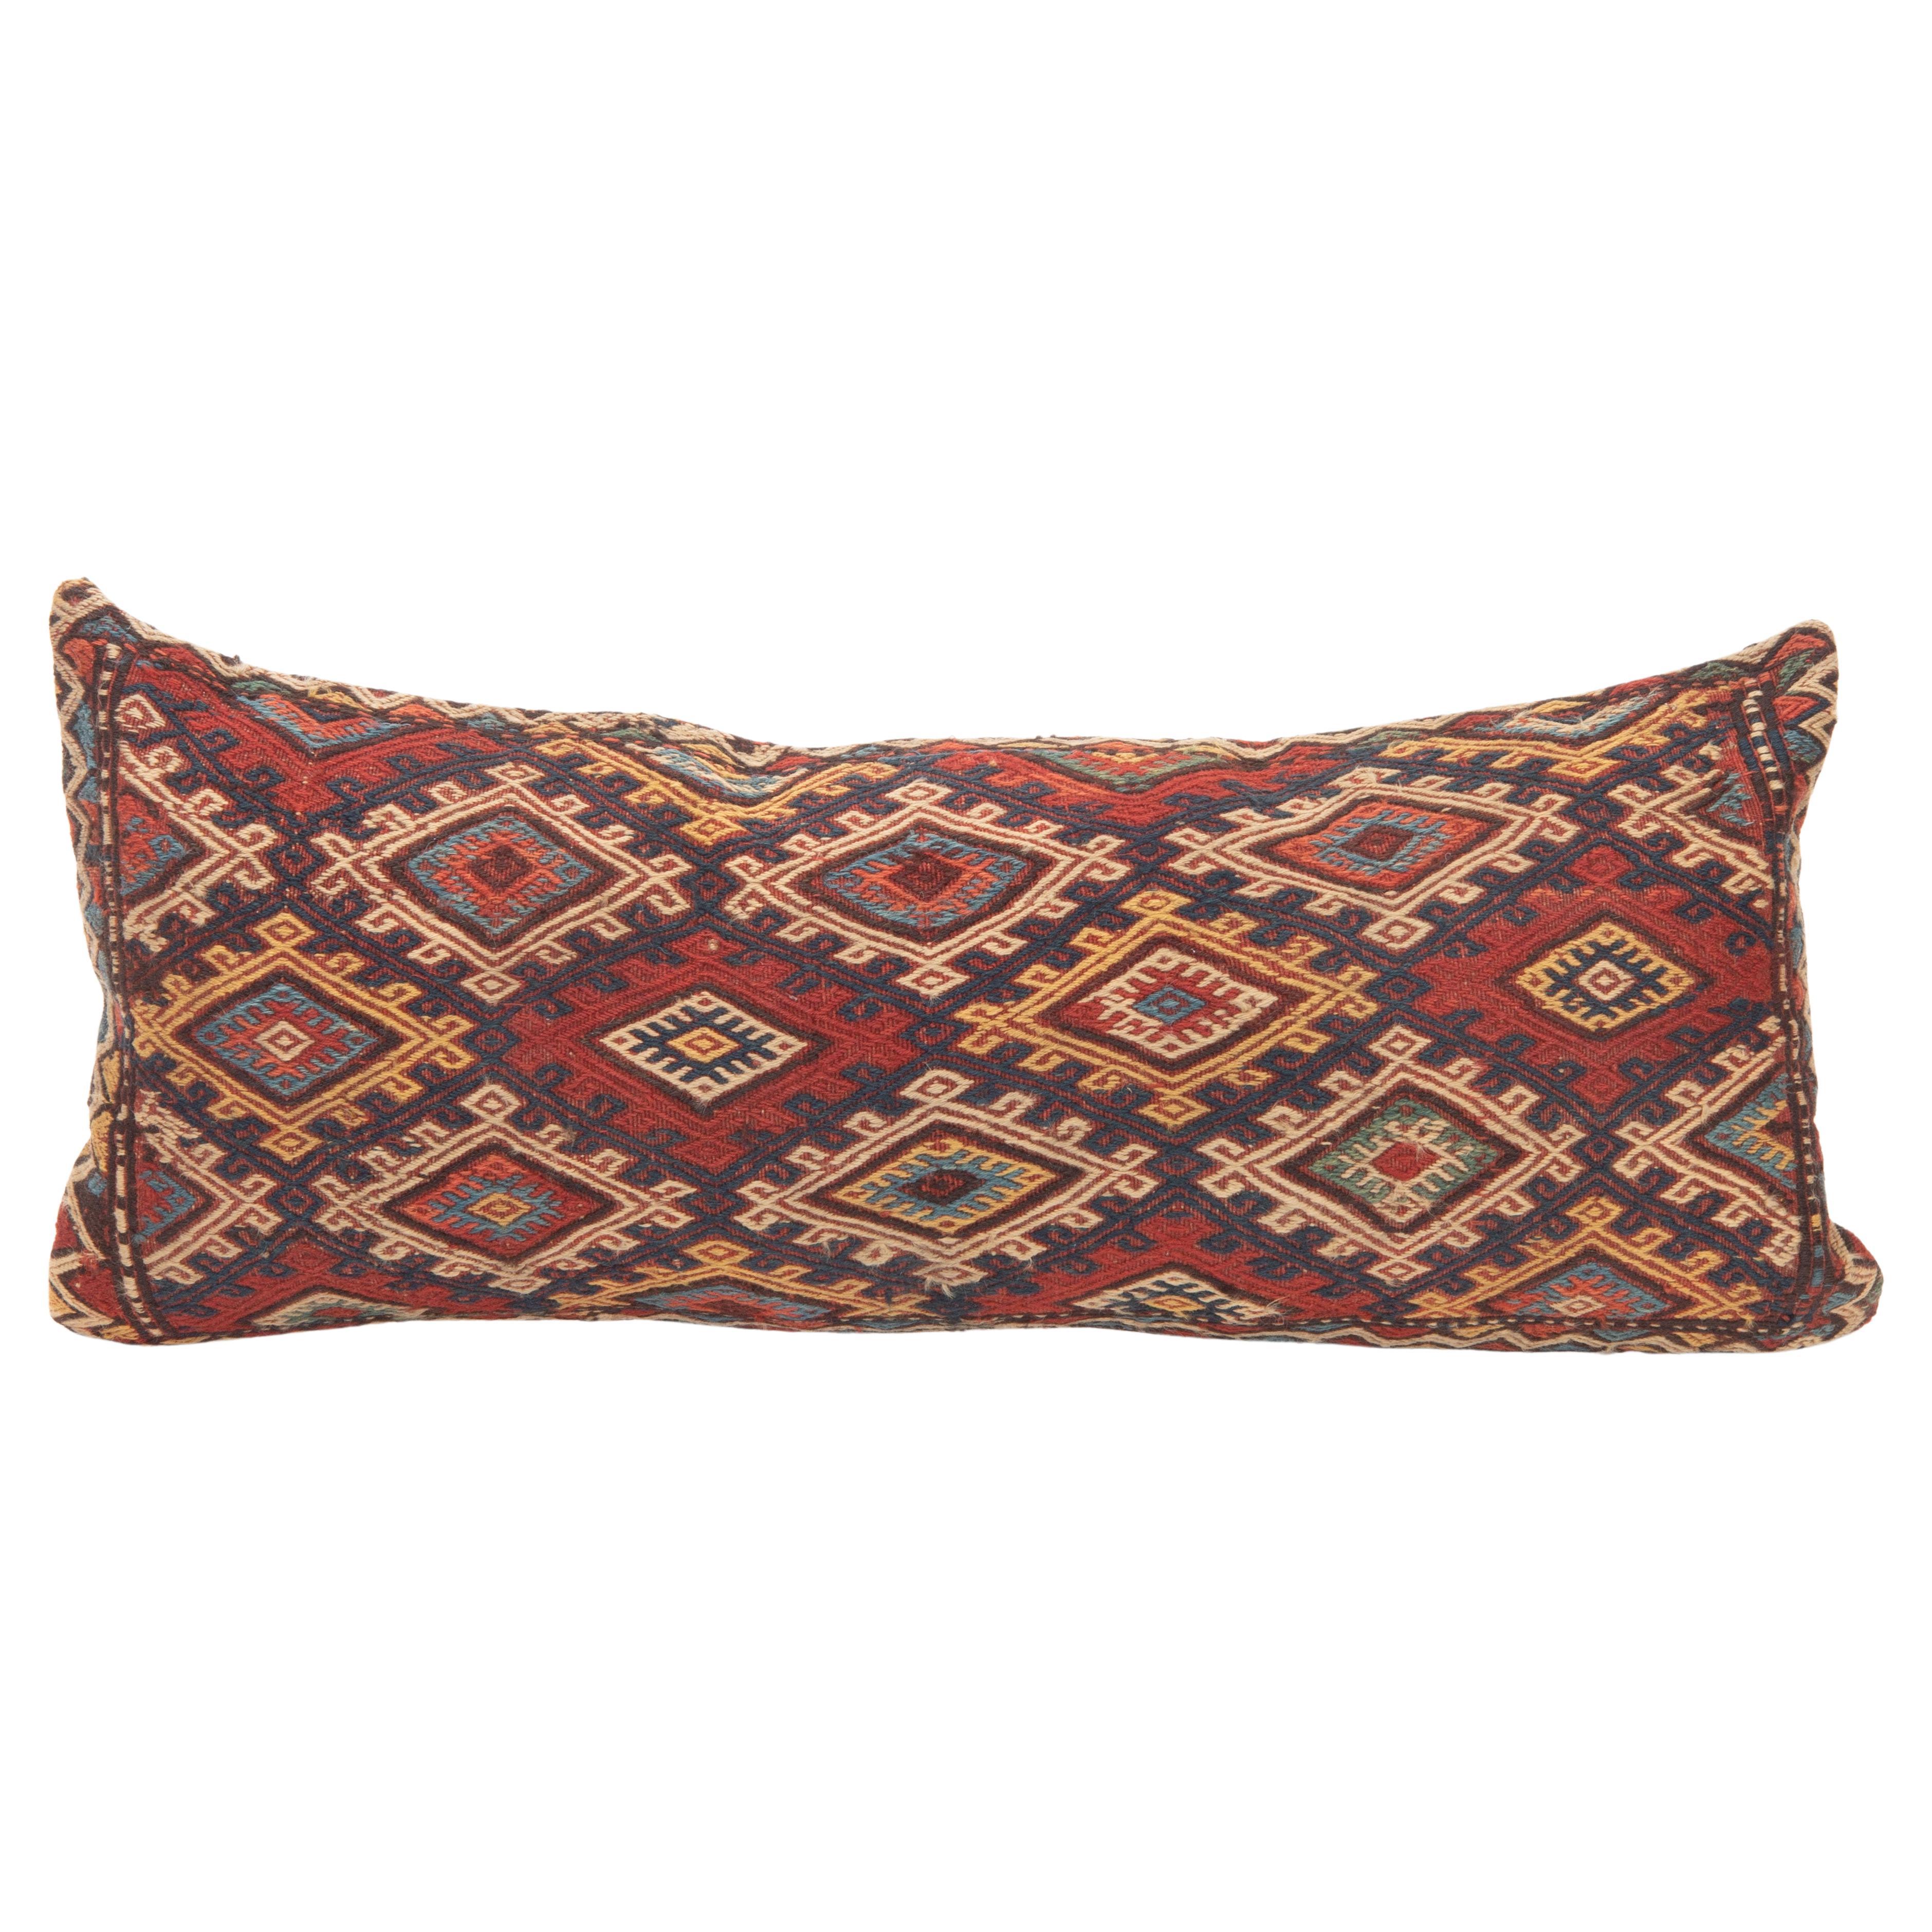 Pillow Cover Fashioned from an Antique Caucasian Mafrash ( storage Bag ) Panel